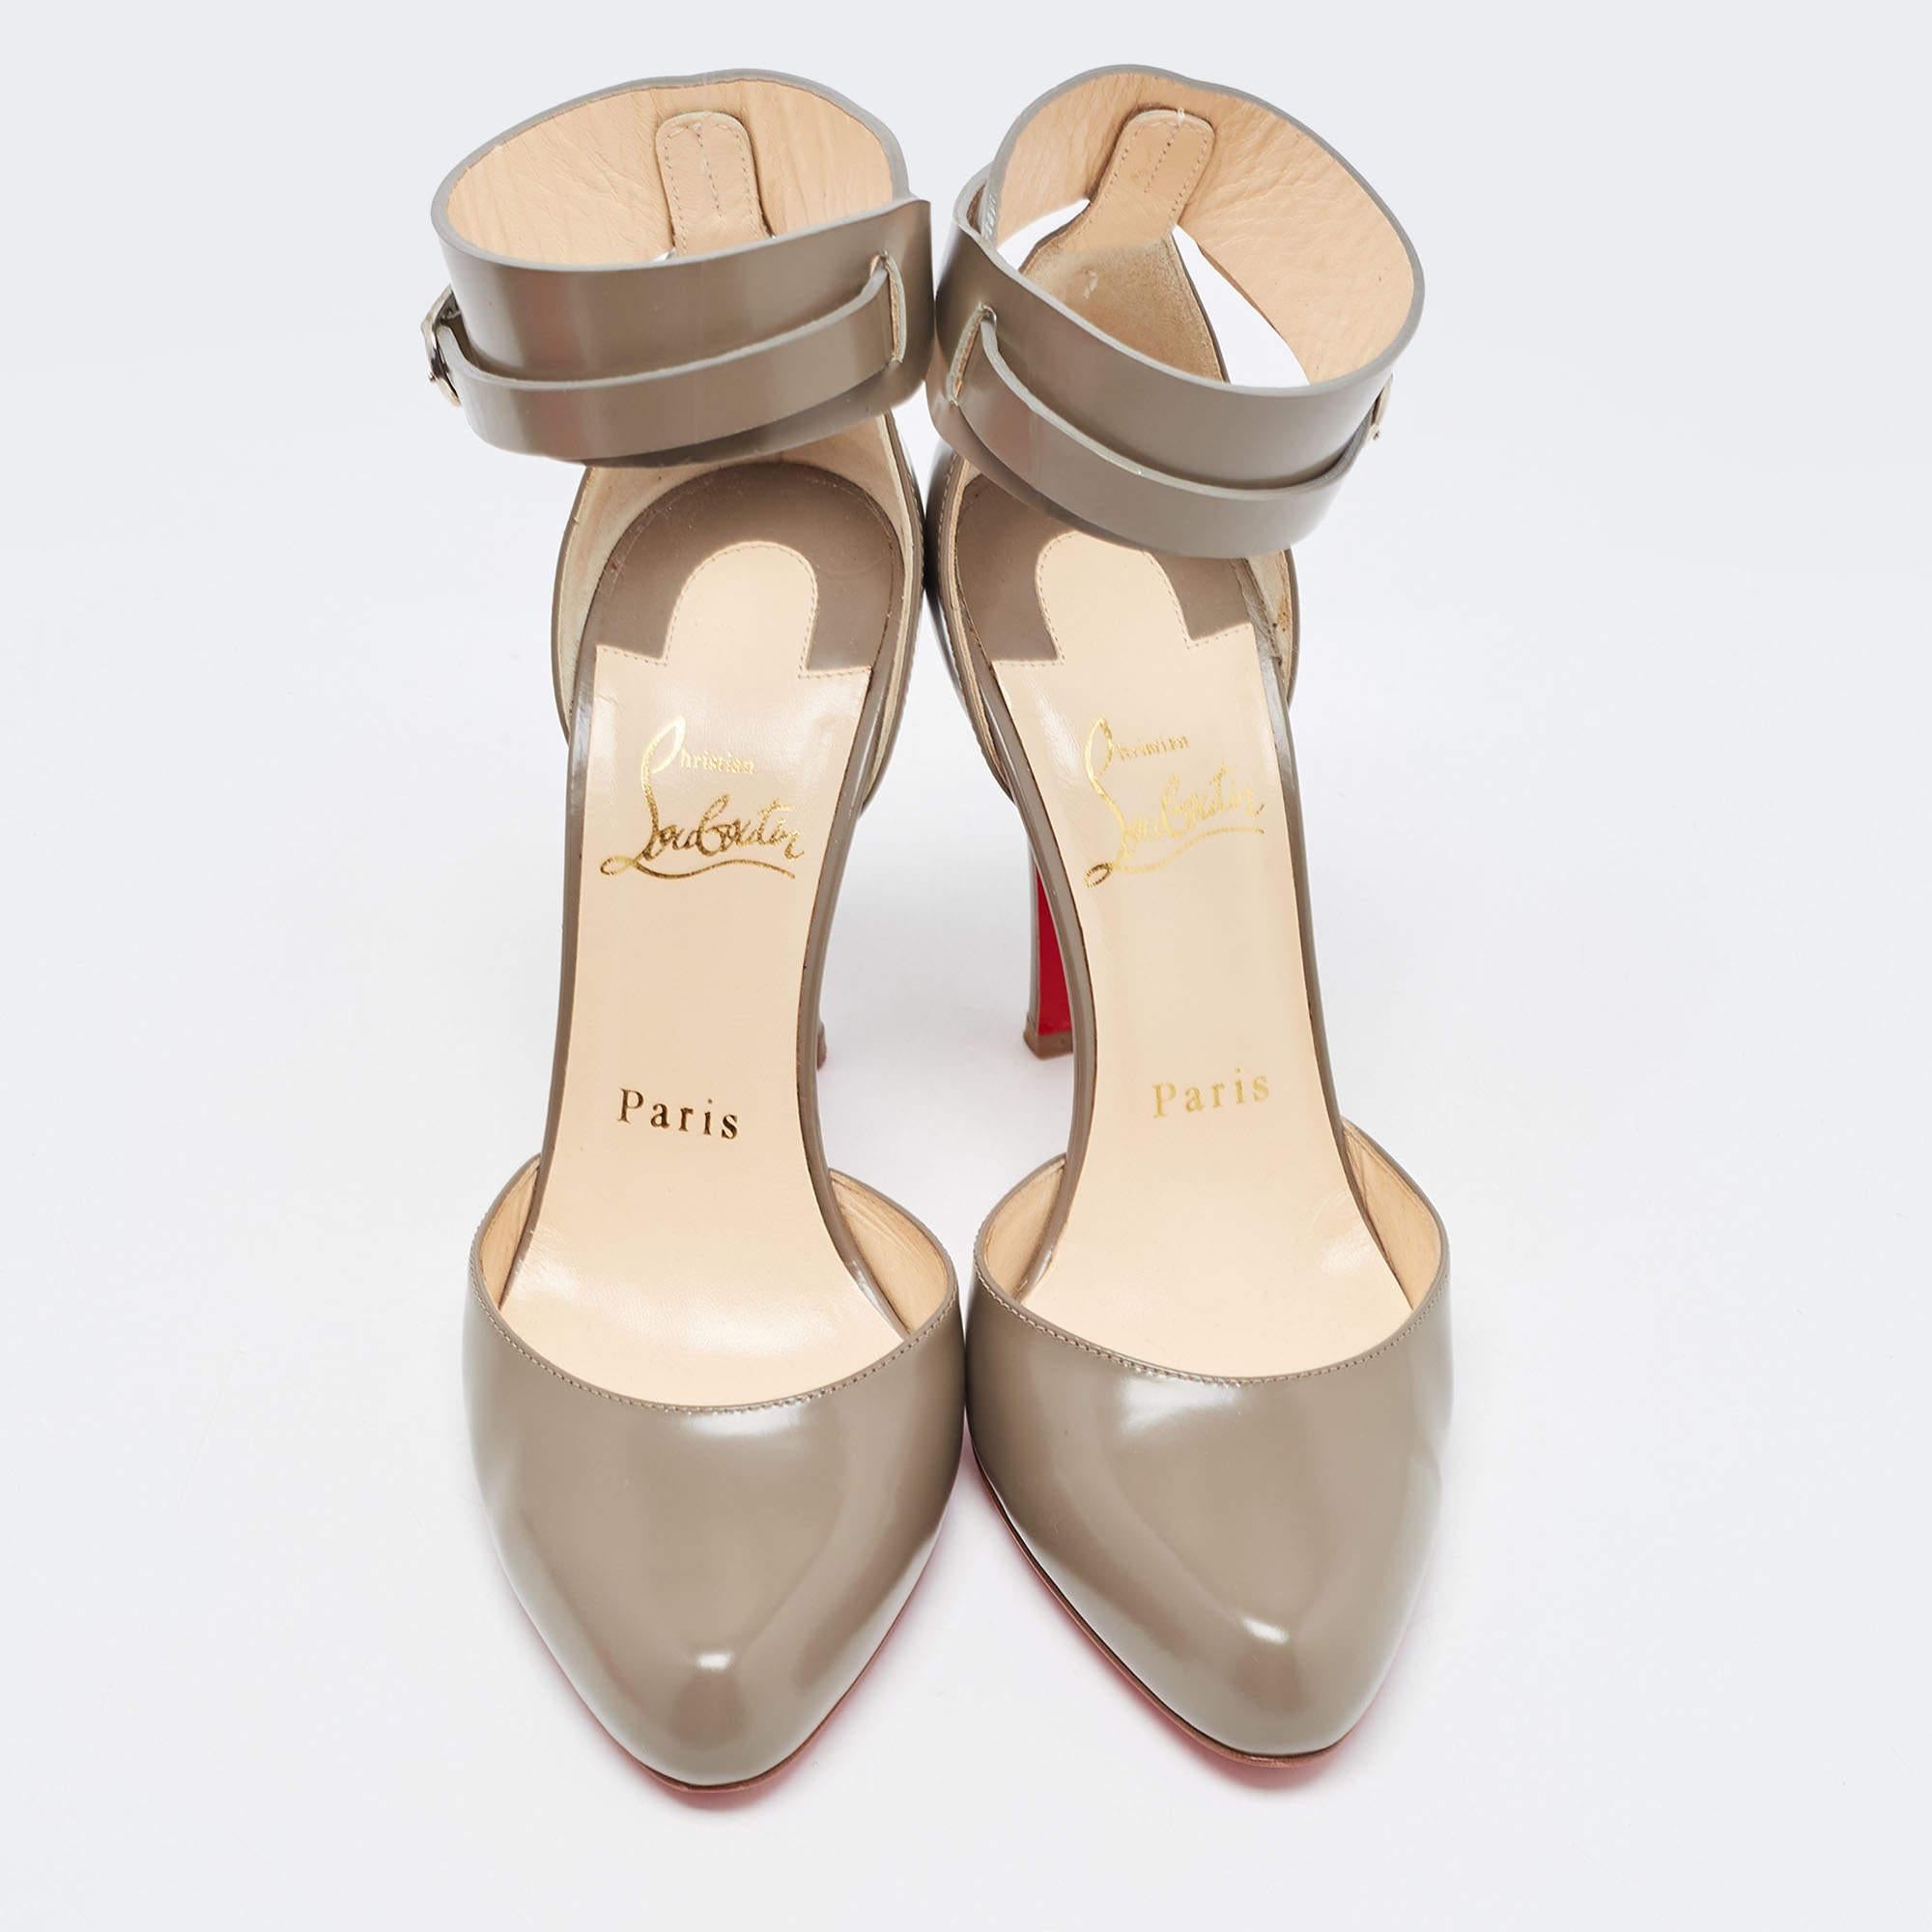 Curvaceous arches, a feminine appeal, and a well-built structure define this set of designer pumps. Coming with comfortable insoles and sleek heels, style them with your favorite outfits.

Includes: Original Dustbag

